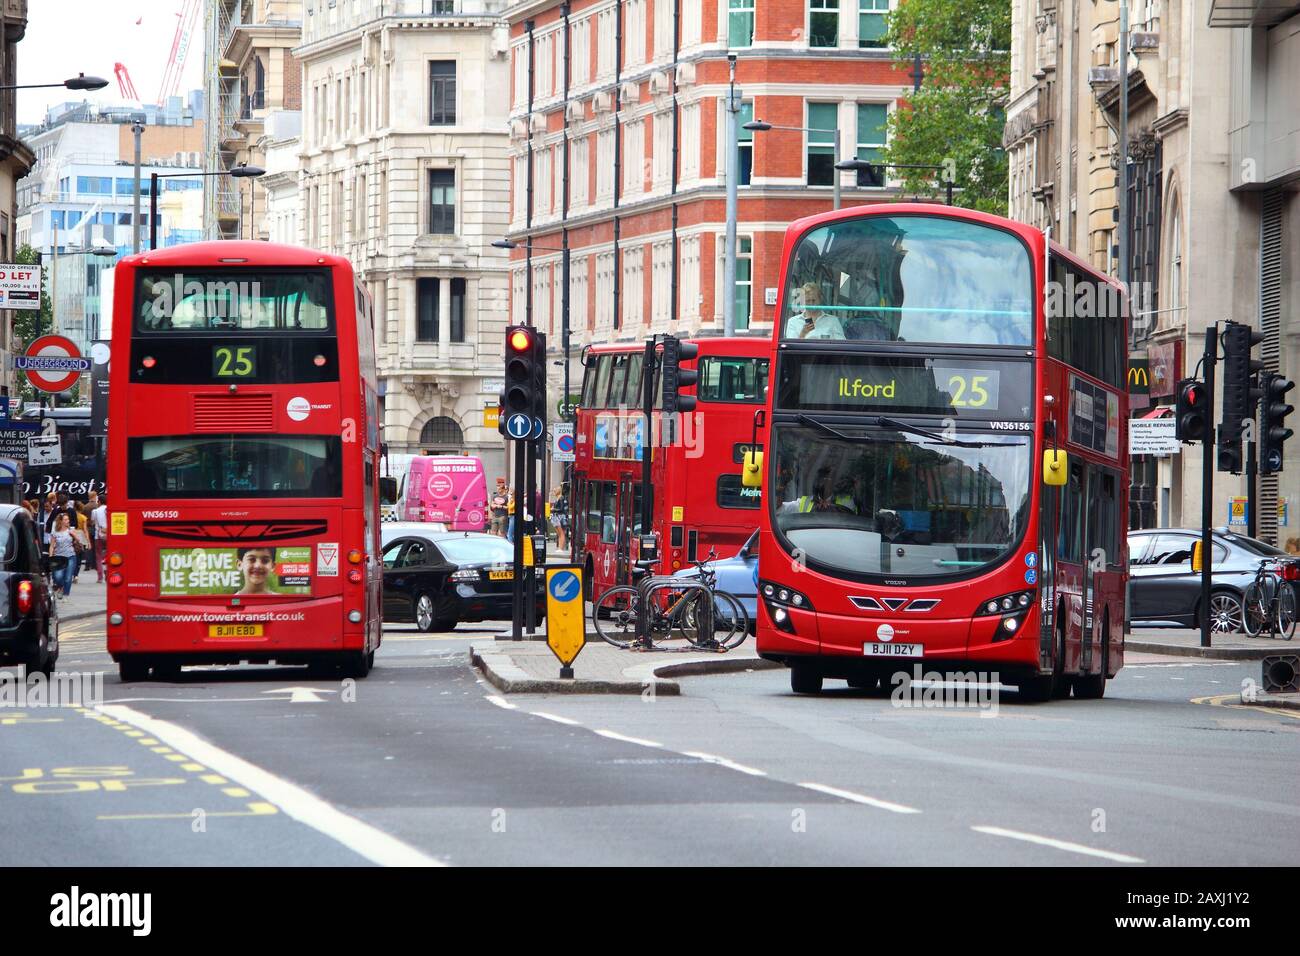 LONDON, UK - JULY 9, 2016: People ride city buses in Holborn, London. Transport for London (TFL) operates 8,000 buses on 673 routes. Stock Photo